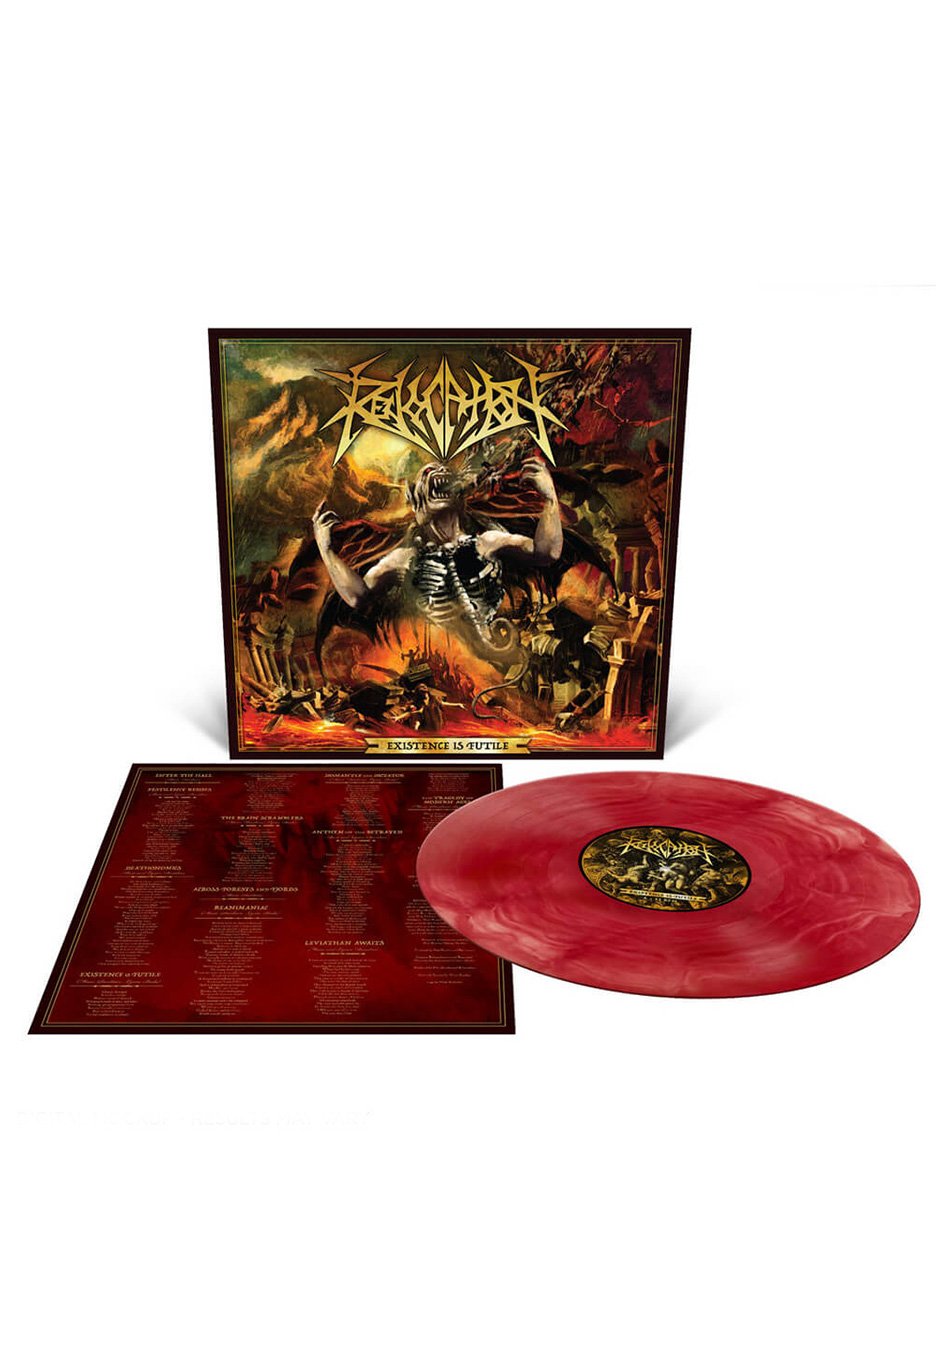 Revocation - Existence Is Futile Ltd. Oxblood/Translucent Gold Galaxy - Colored Vinyl